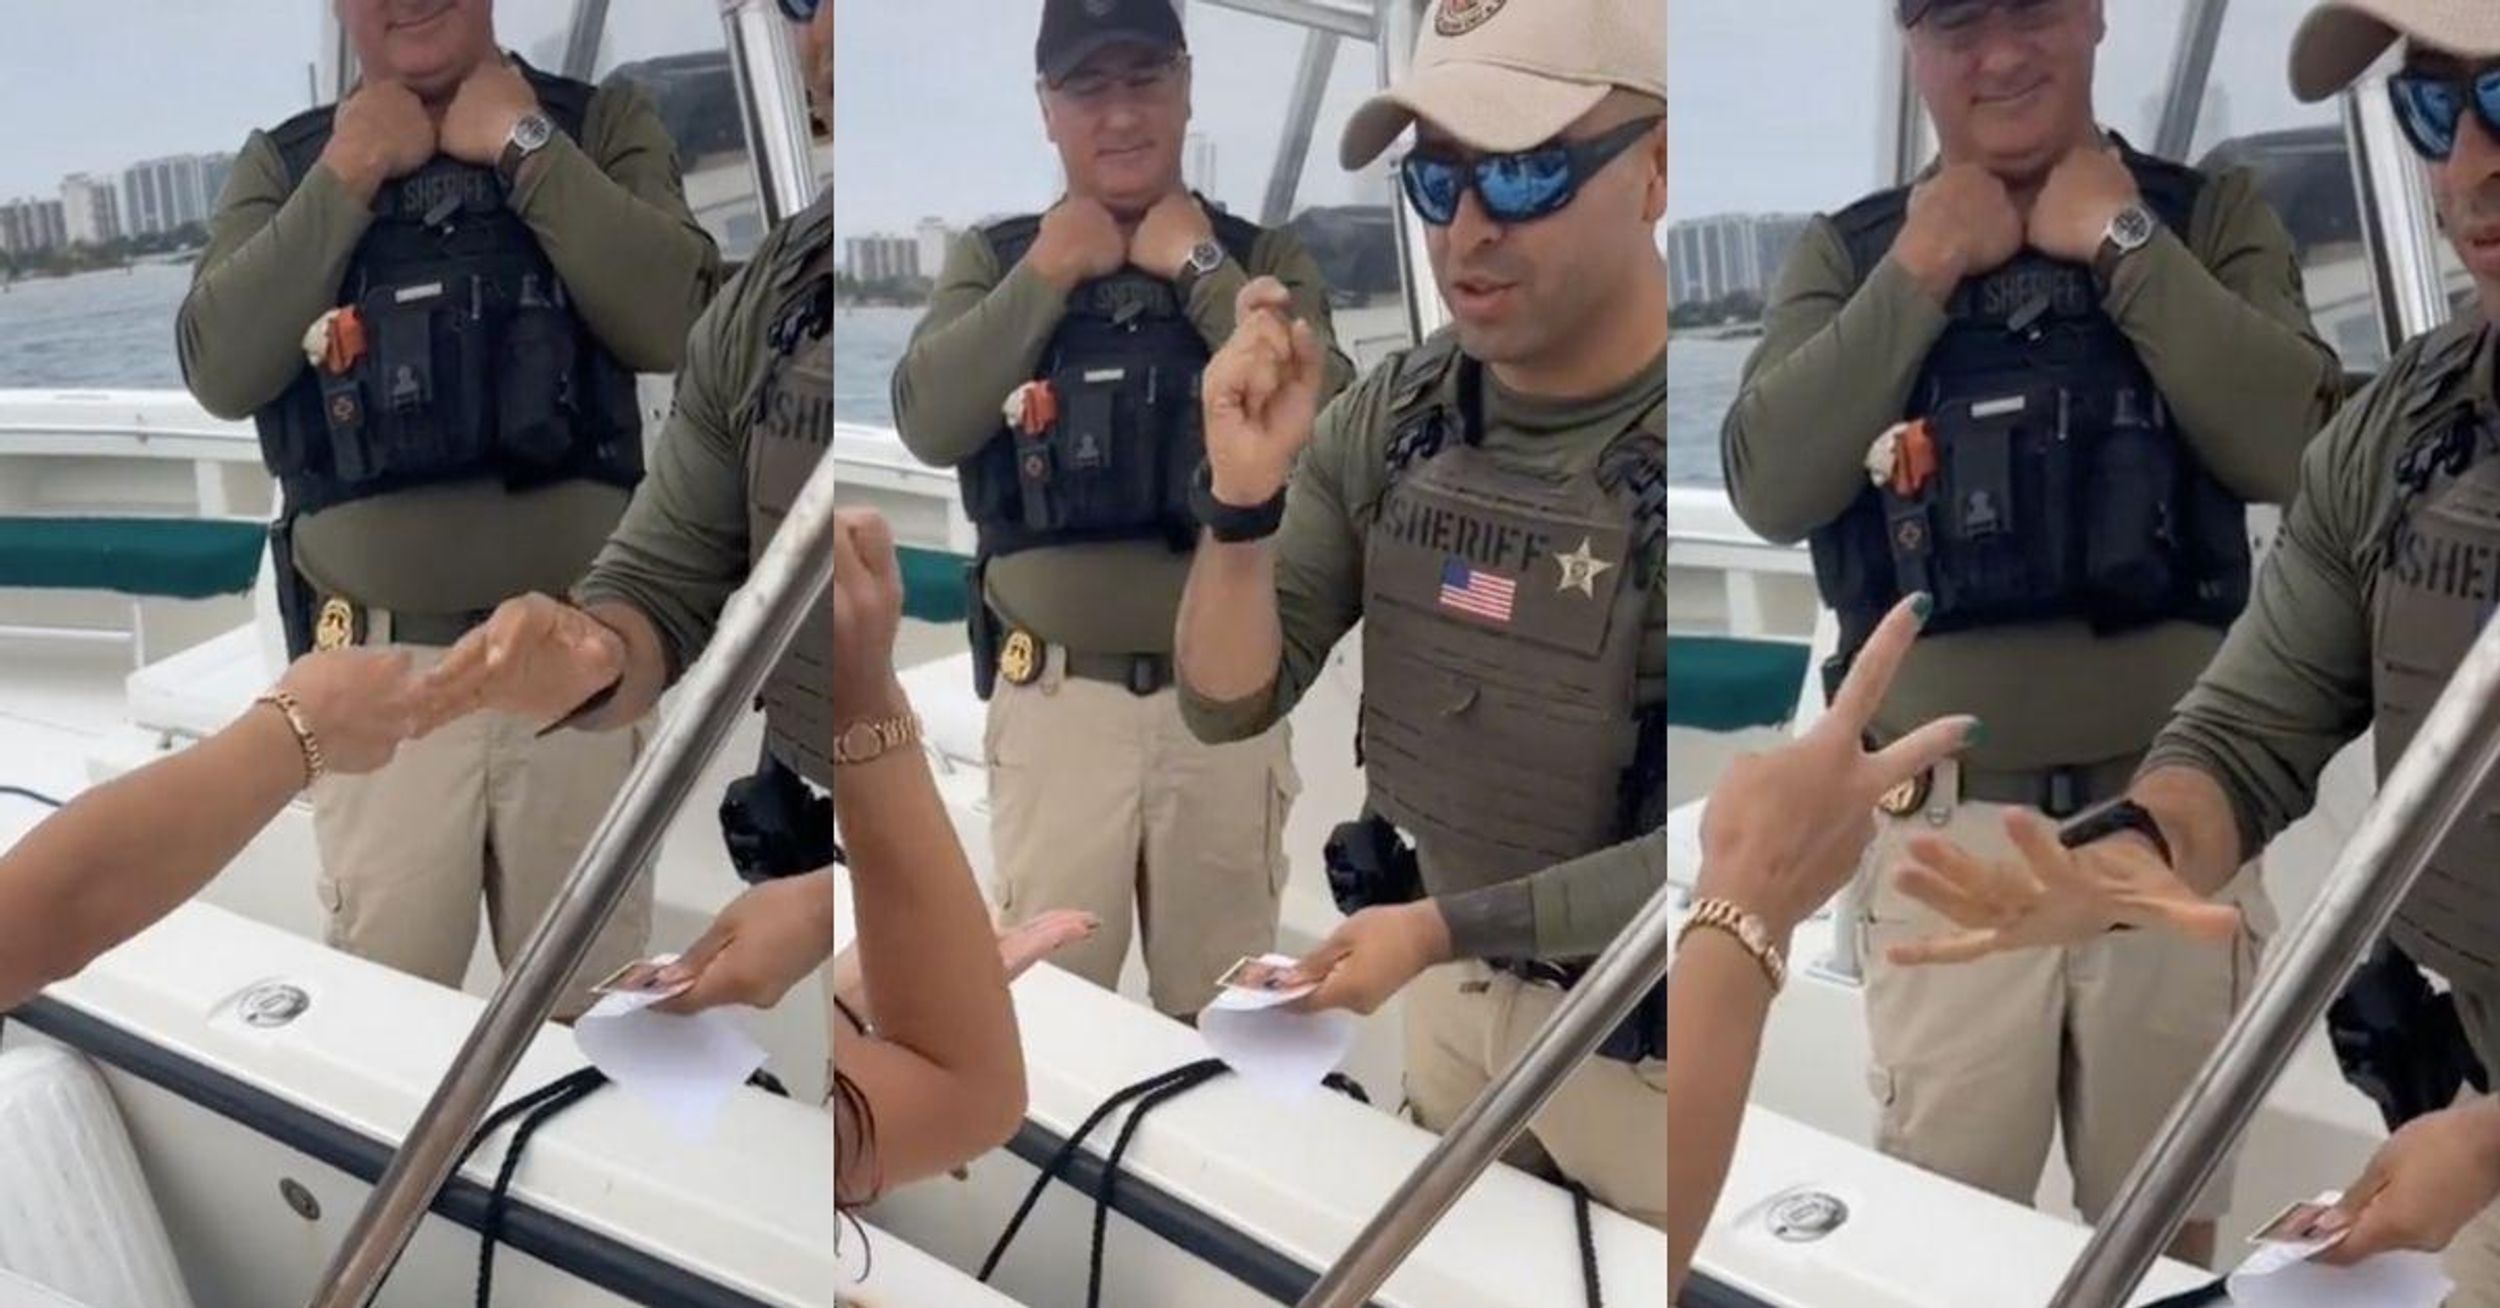 Boaters Spark Debate After Claiming They 'Got Out Of A Felony' By Winning Rock, Paper, Scissors Against Cop